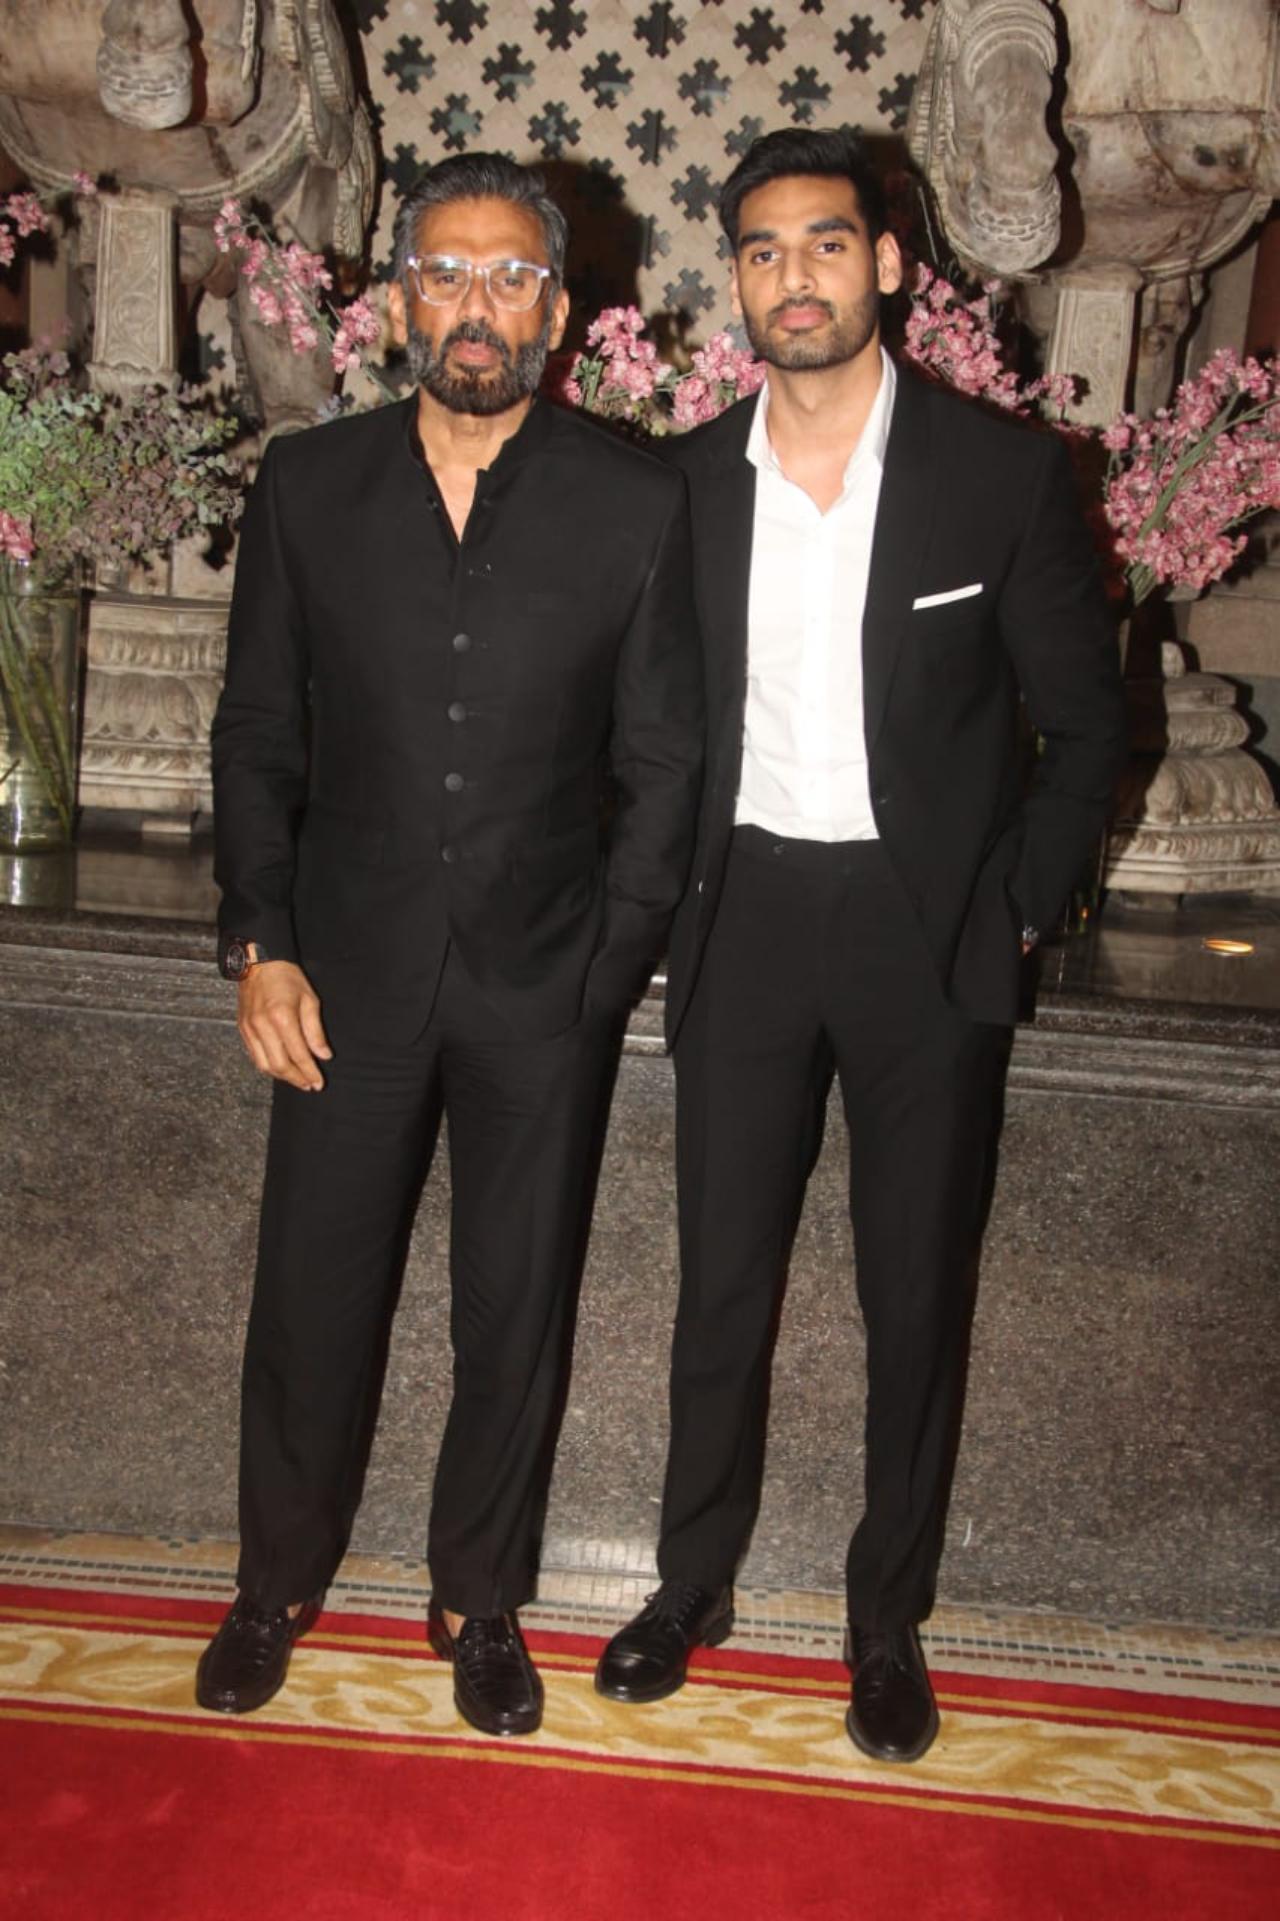 Suniel Shetty and his son Ahan Shetty twinned in black for the function. The father-son duo posed together for the paparazzi. Ahan recently made his debut with the film 'Tadap' that was released in 2021